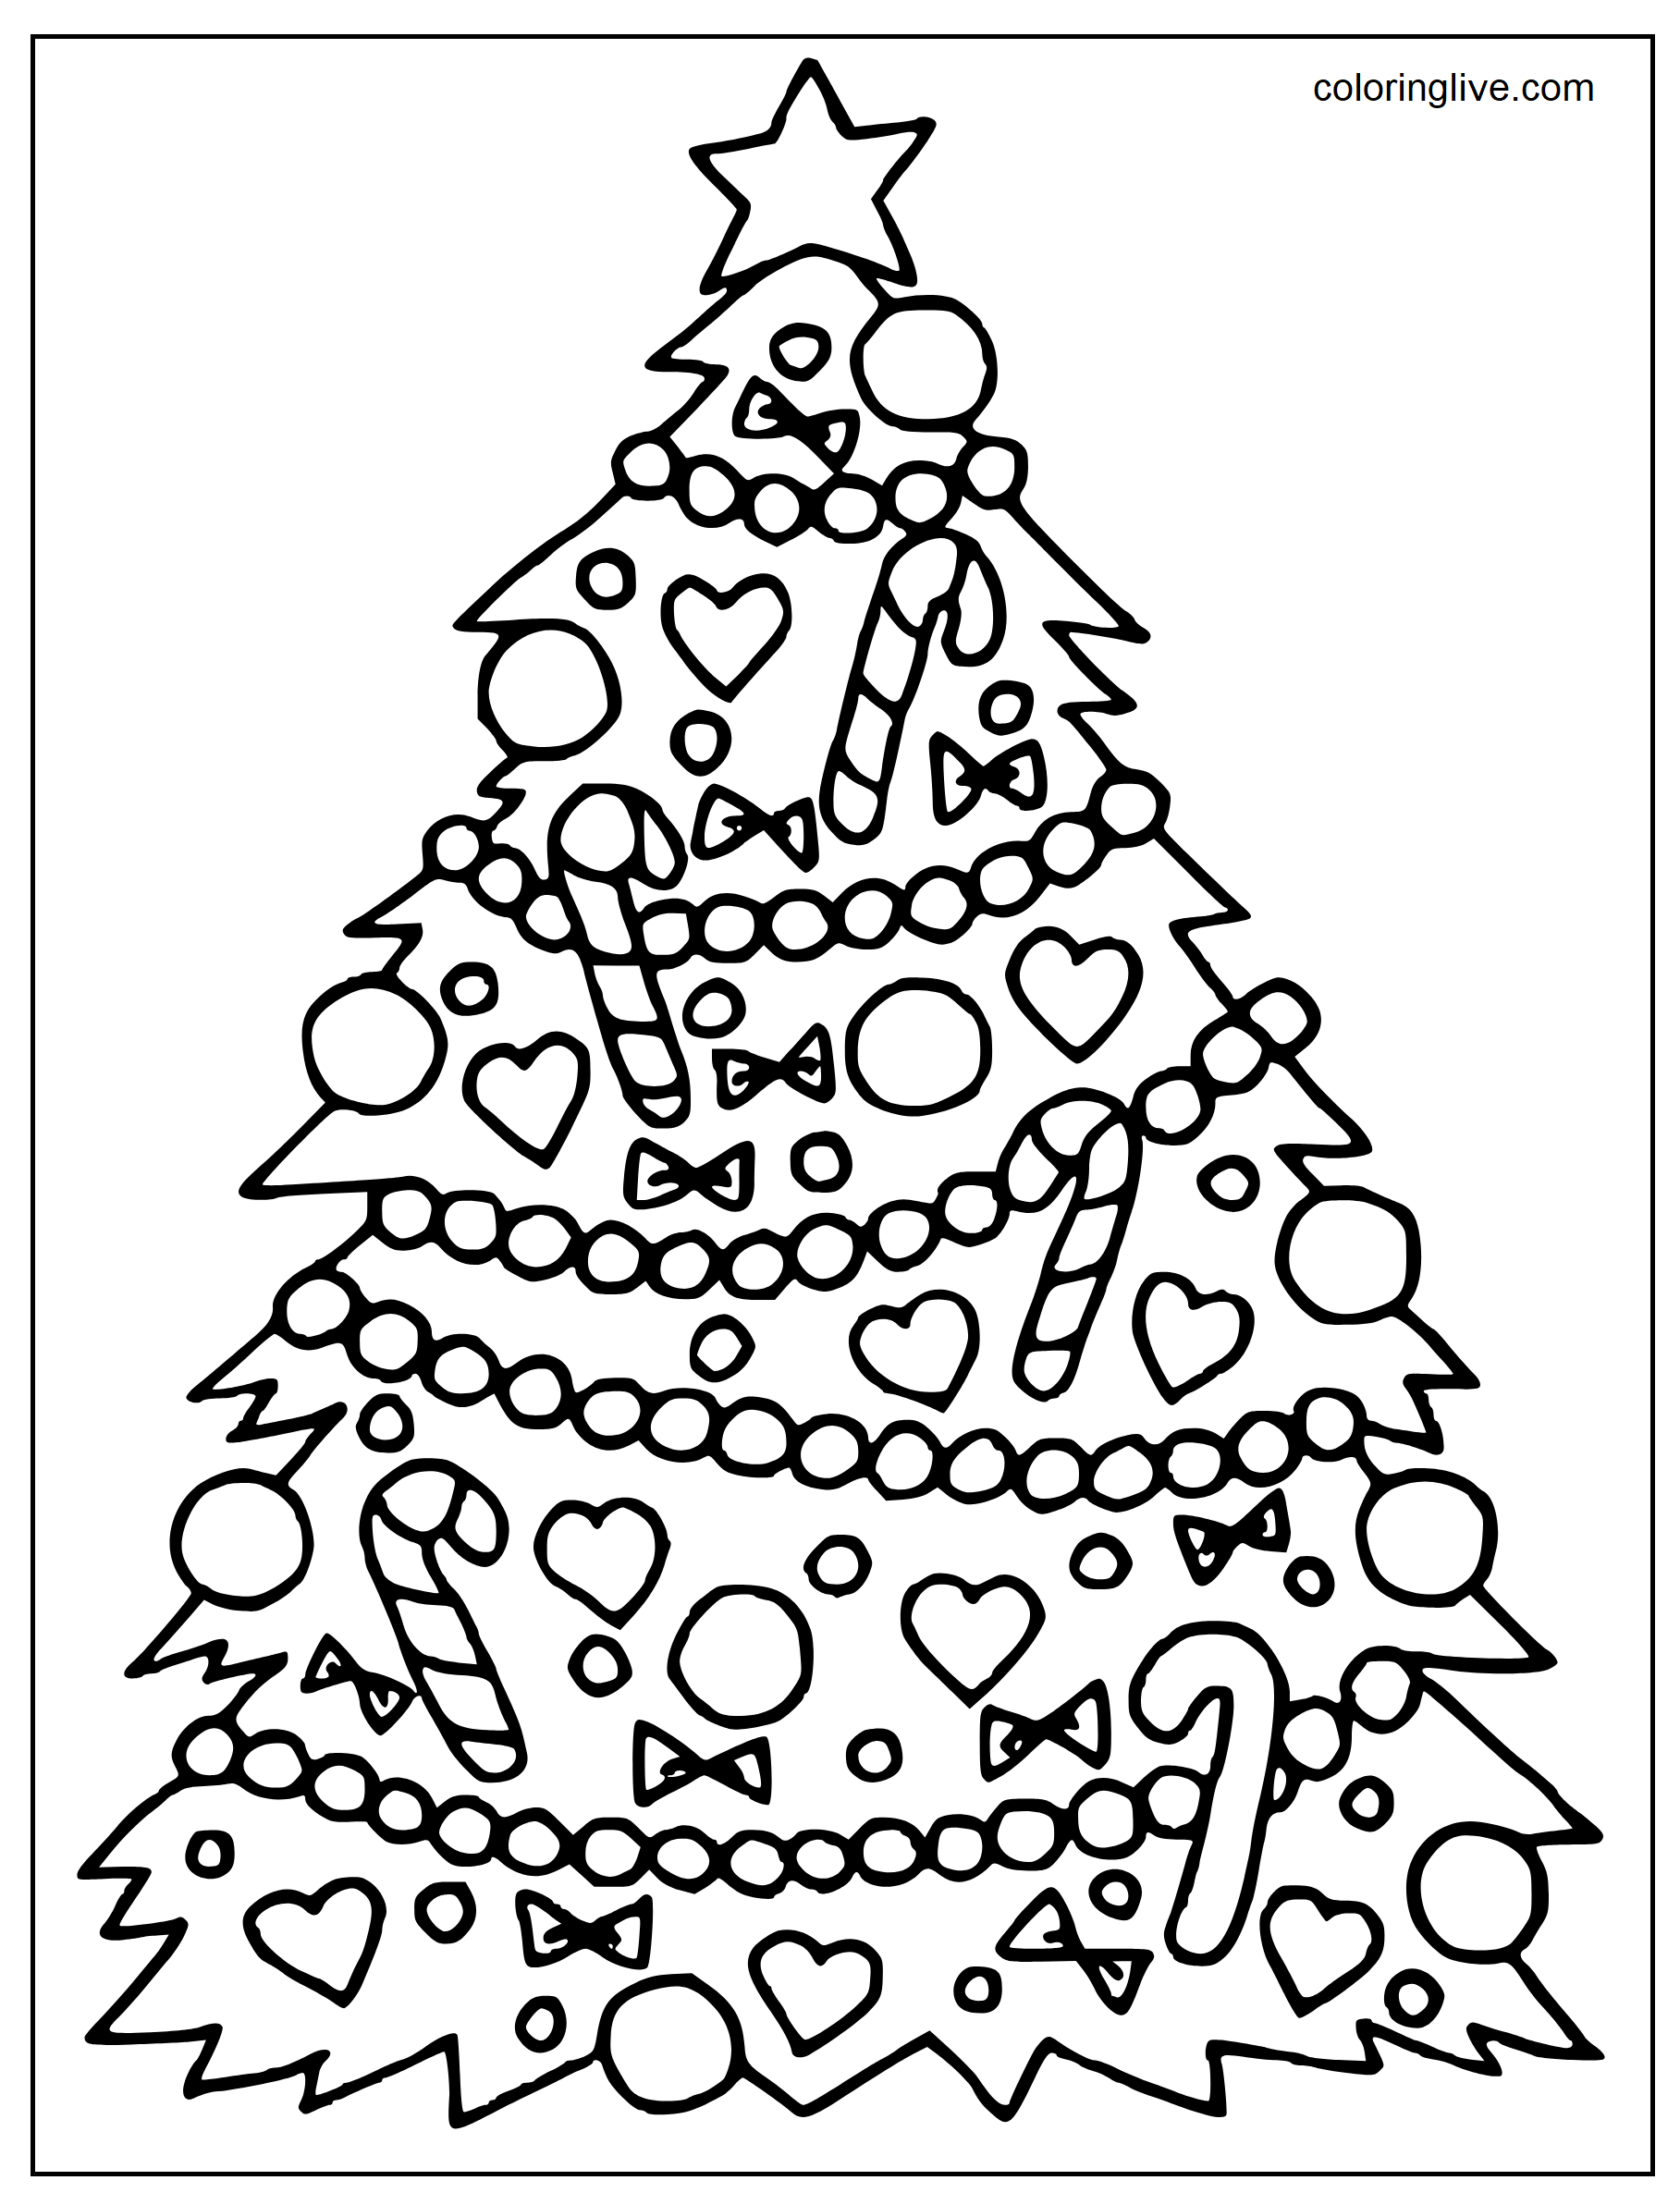 Printable Christmas tree and various shapes for Coloring Page for kids.